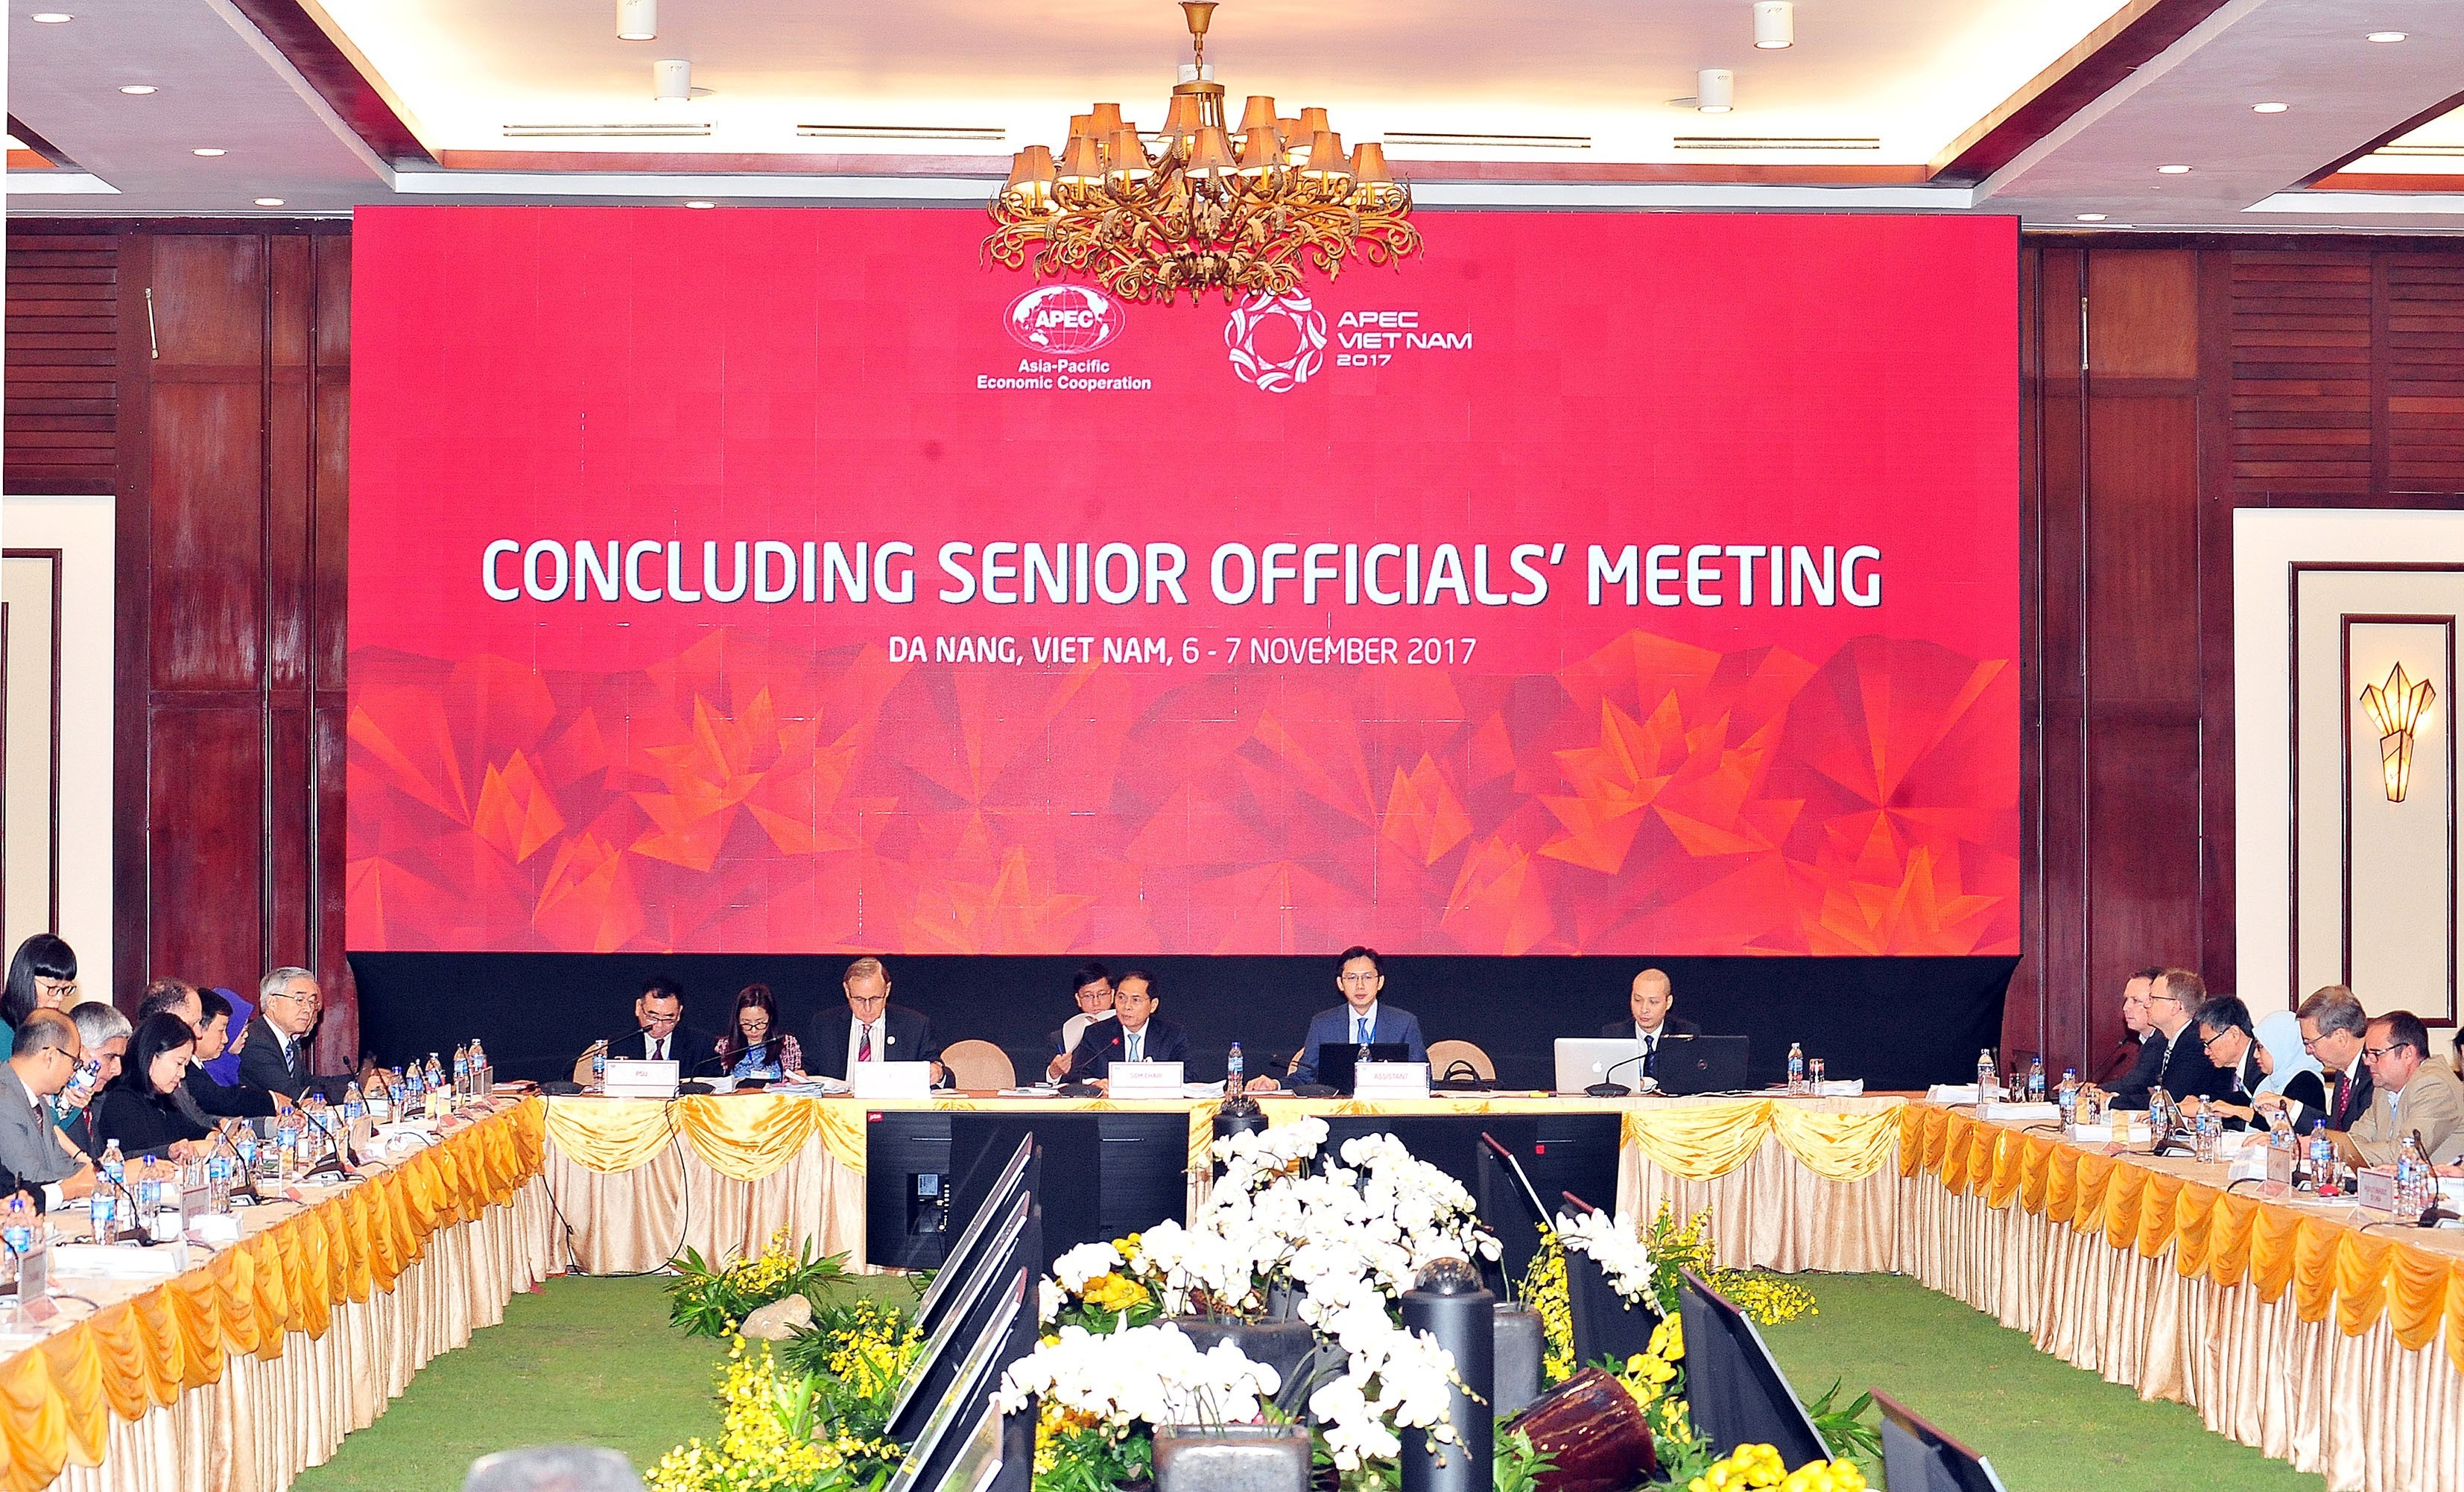 Concluding Senior Officials' Meeting kicked off in Danang